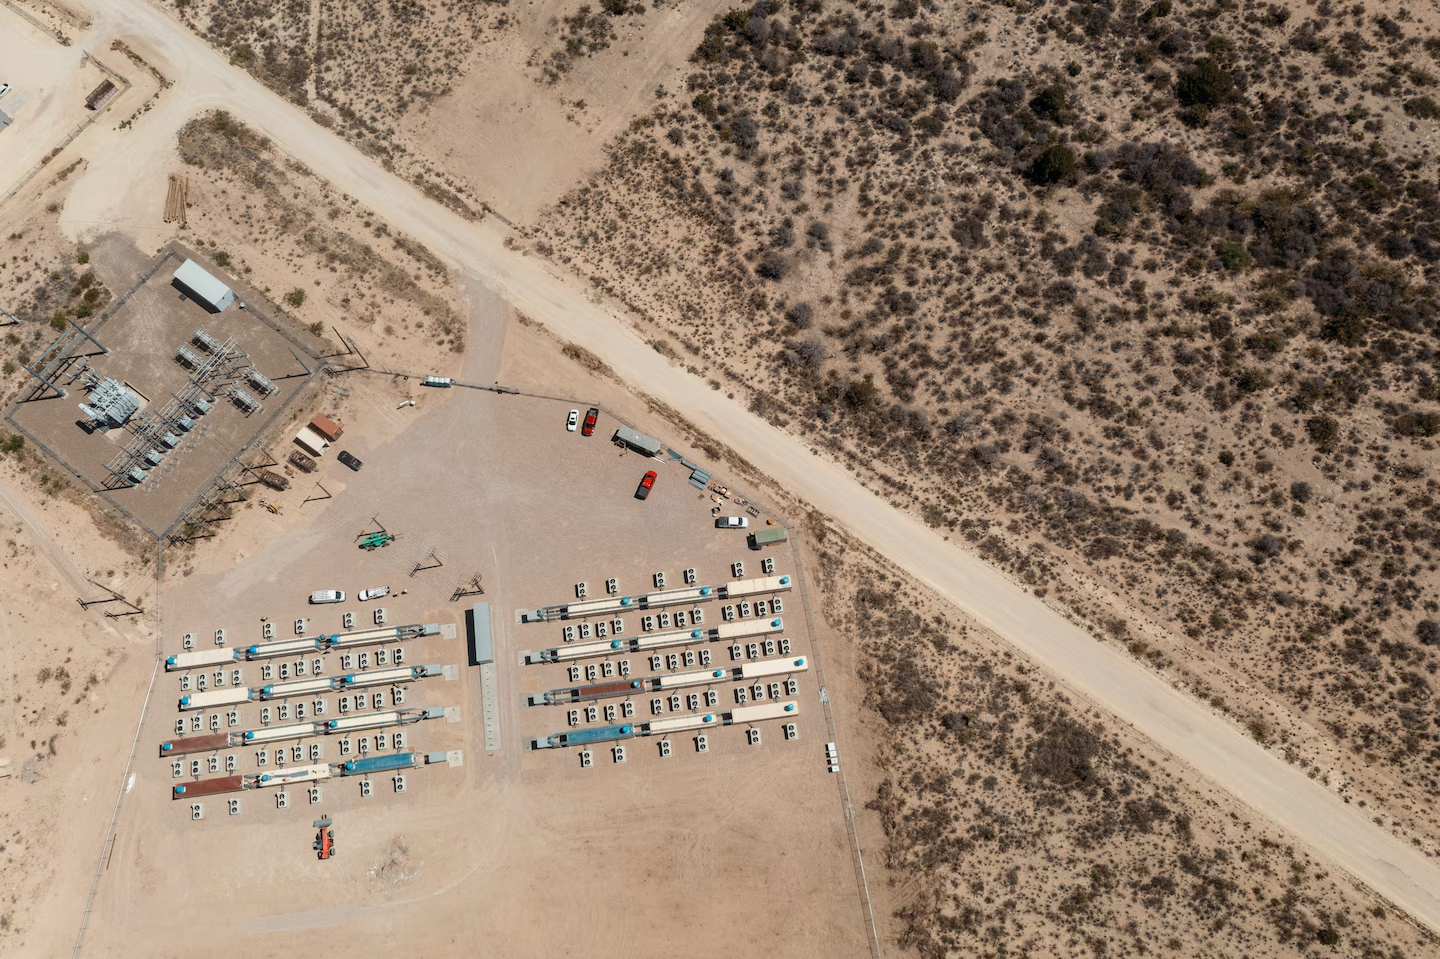 The Cormint Data Systems bitcoin-mining facility in Fort Stockton, Tex.